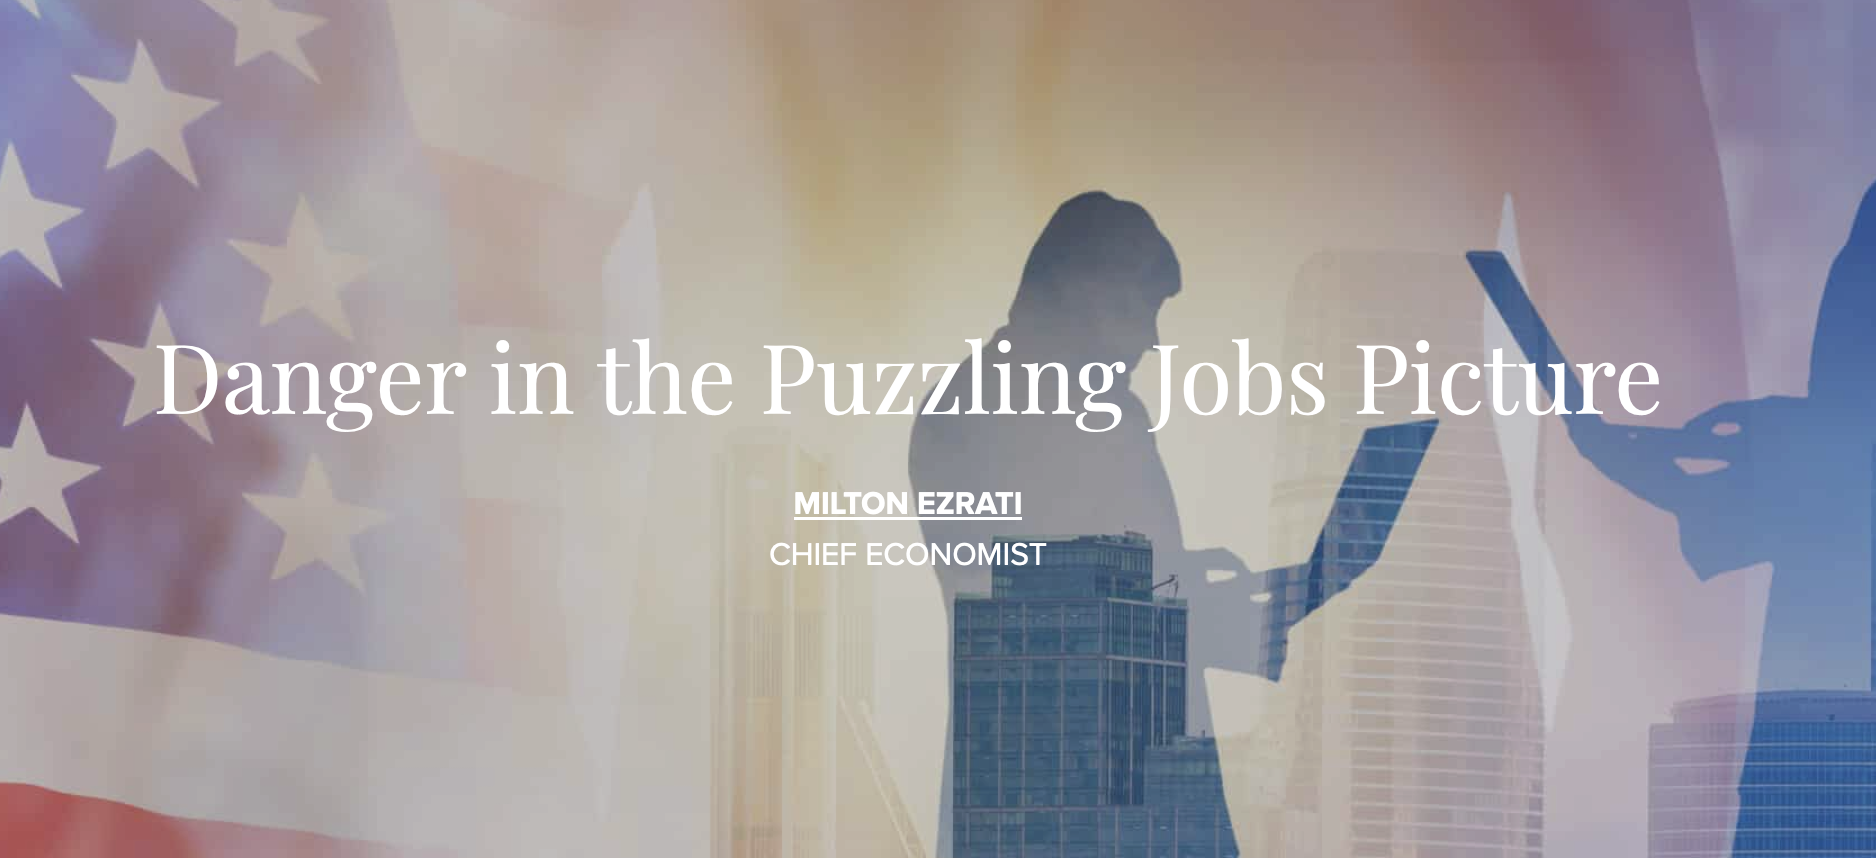 Danger in the Puzzling Jobs Picture